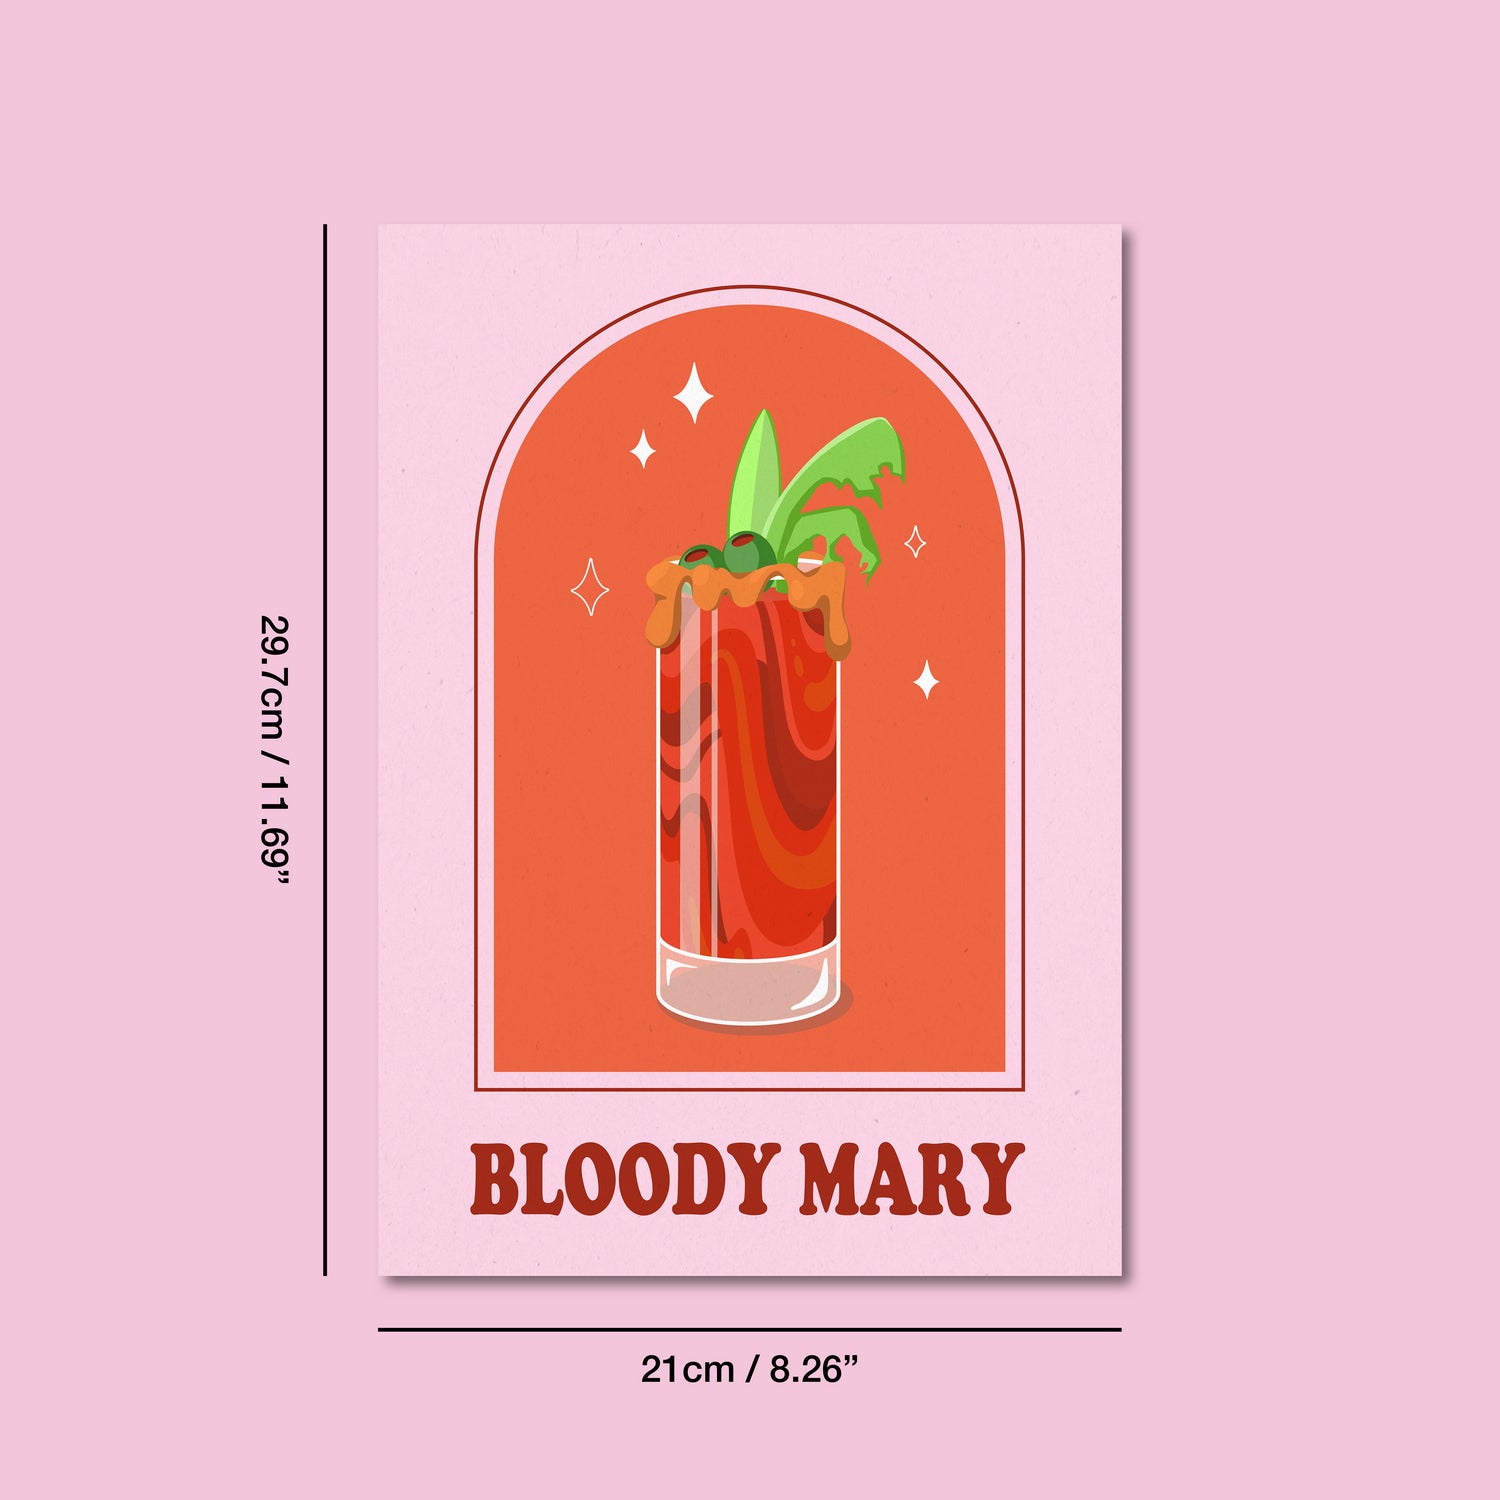 Bloody Mary Art Print by Cocktail Critters